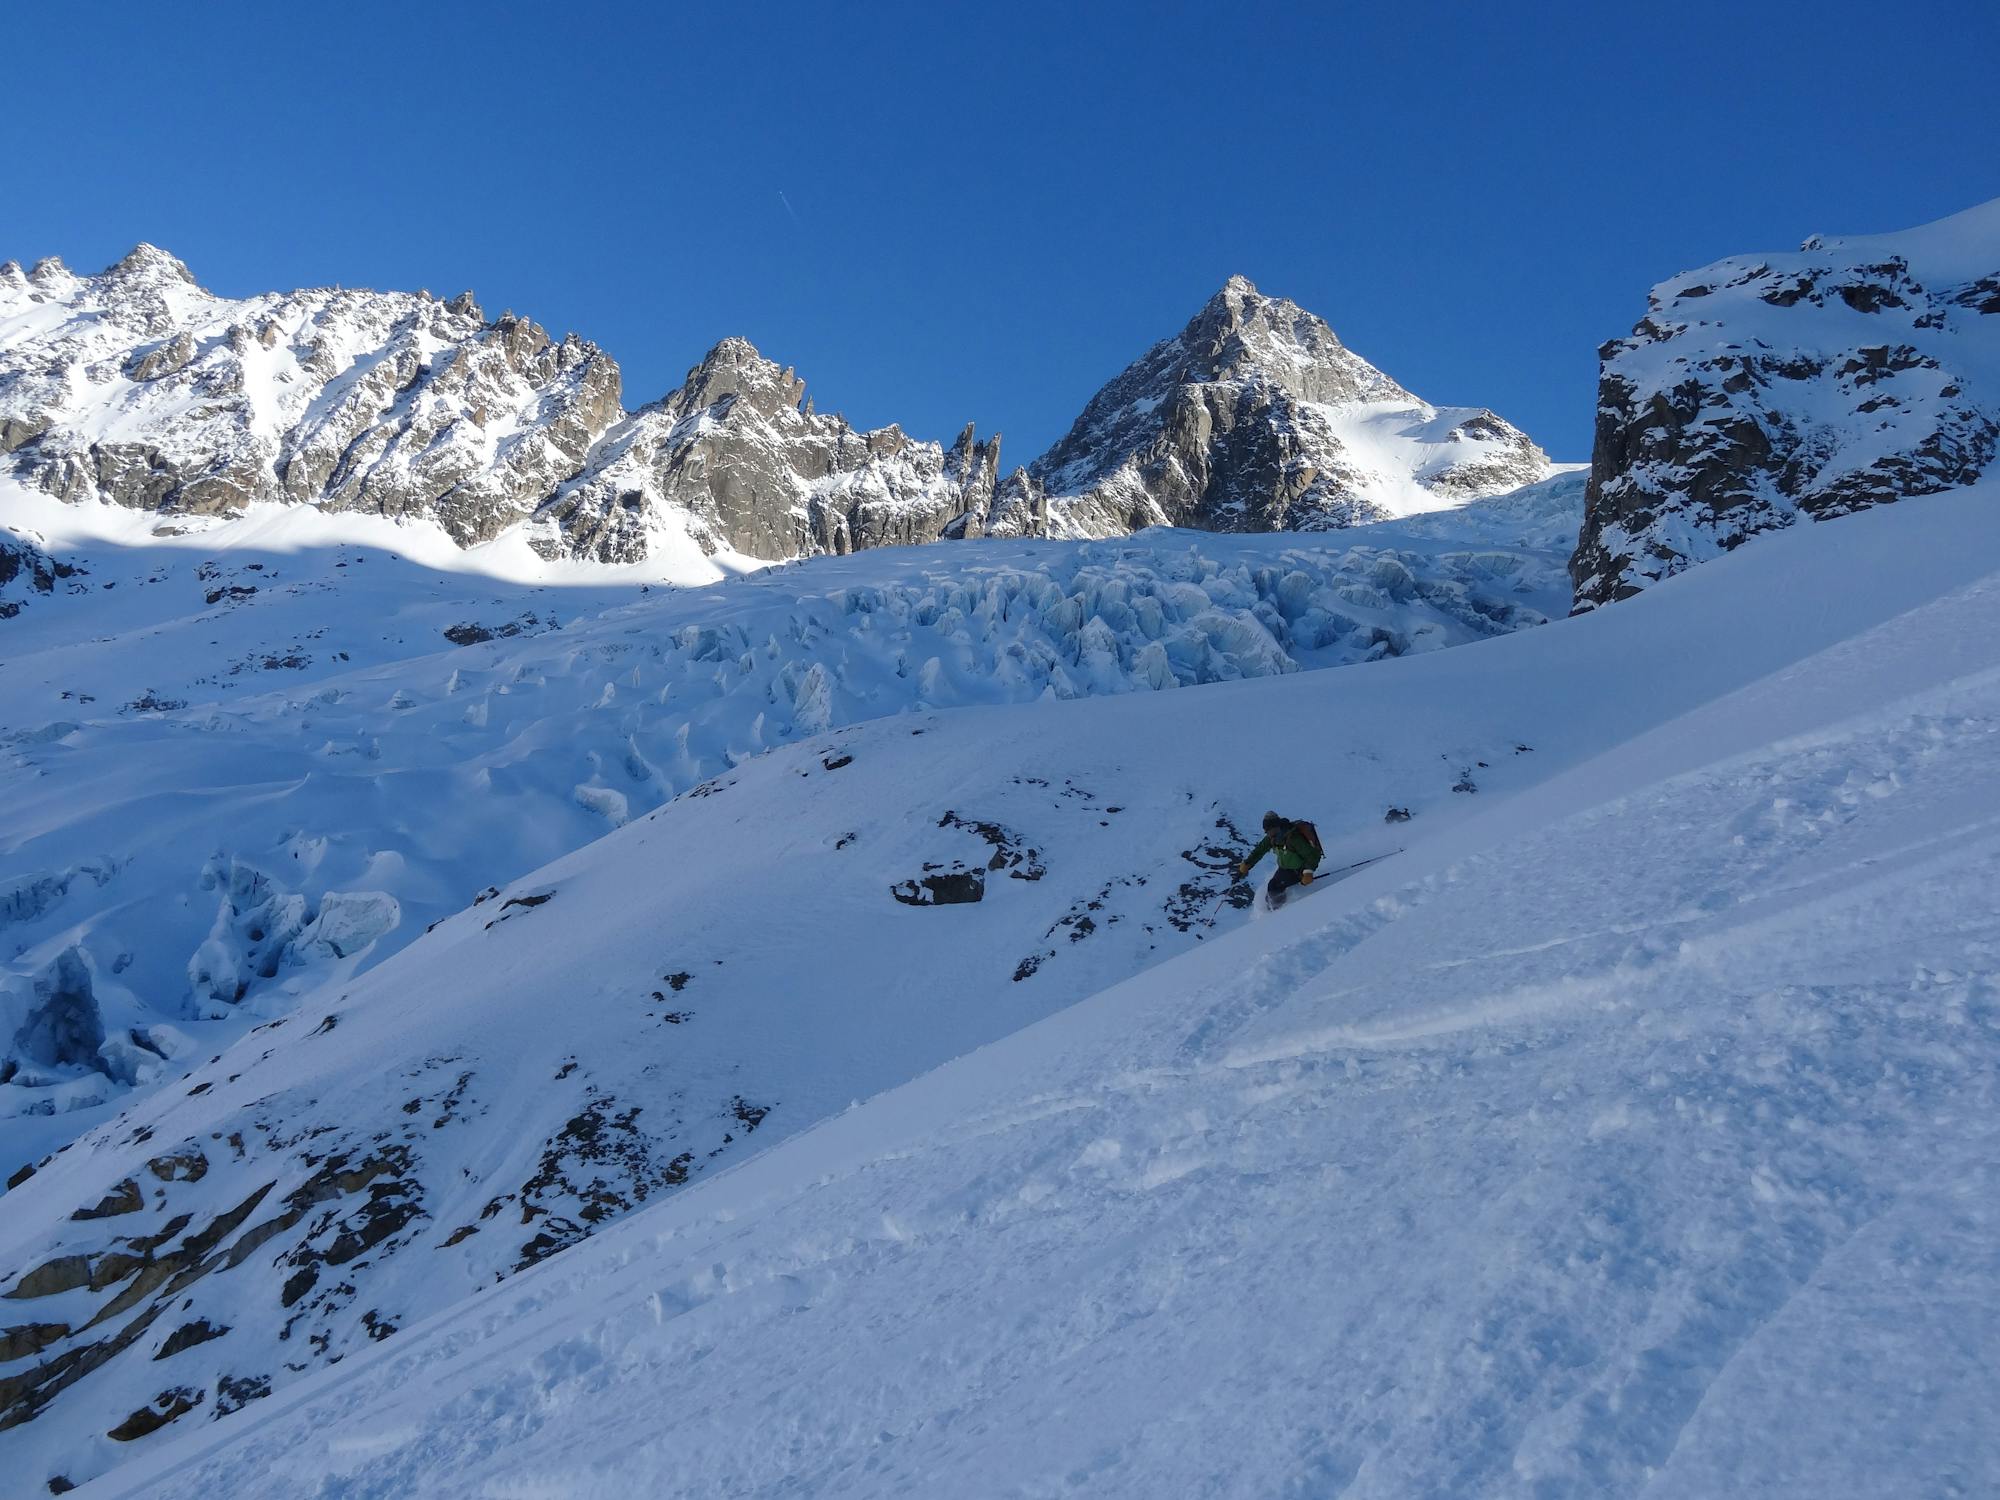 Incredible skiing and fantastic ambience below the Trient Glacier.